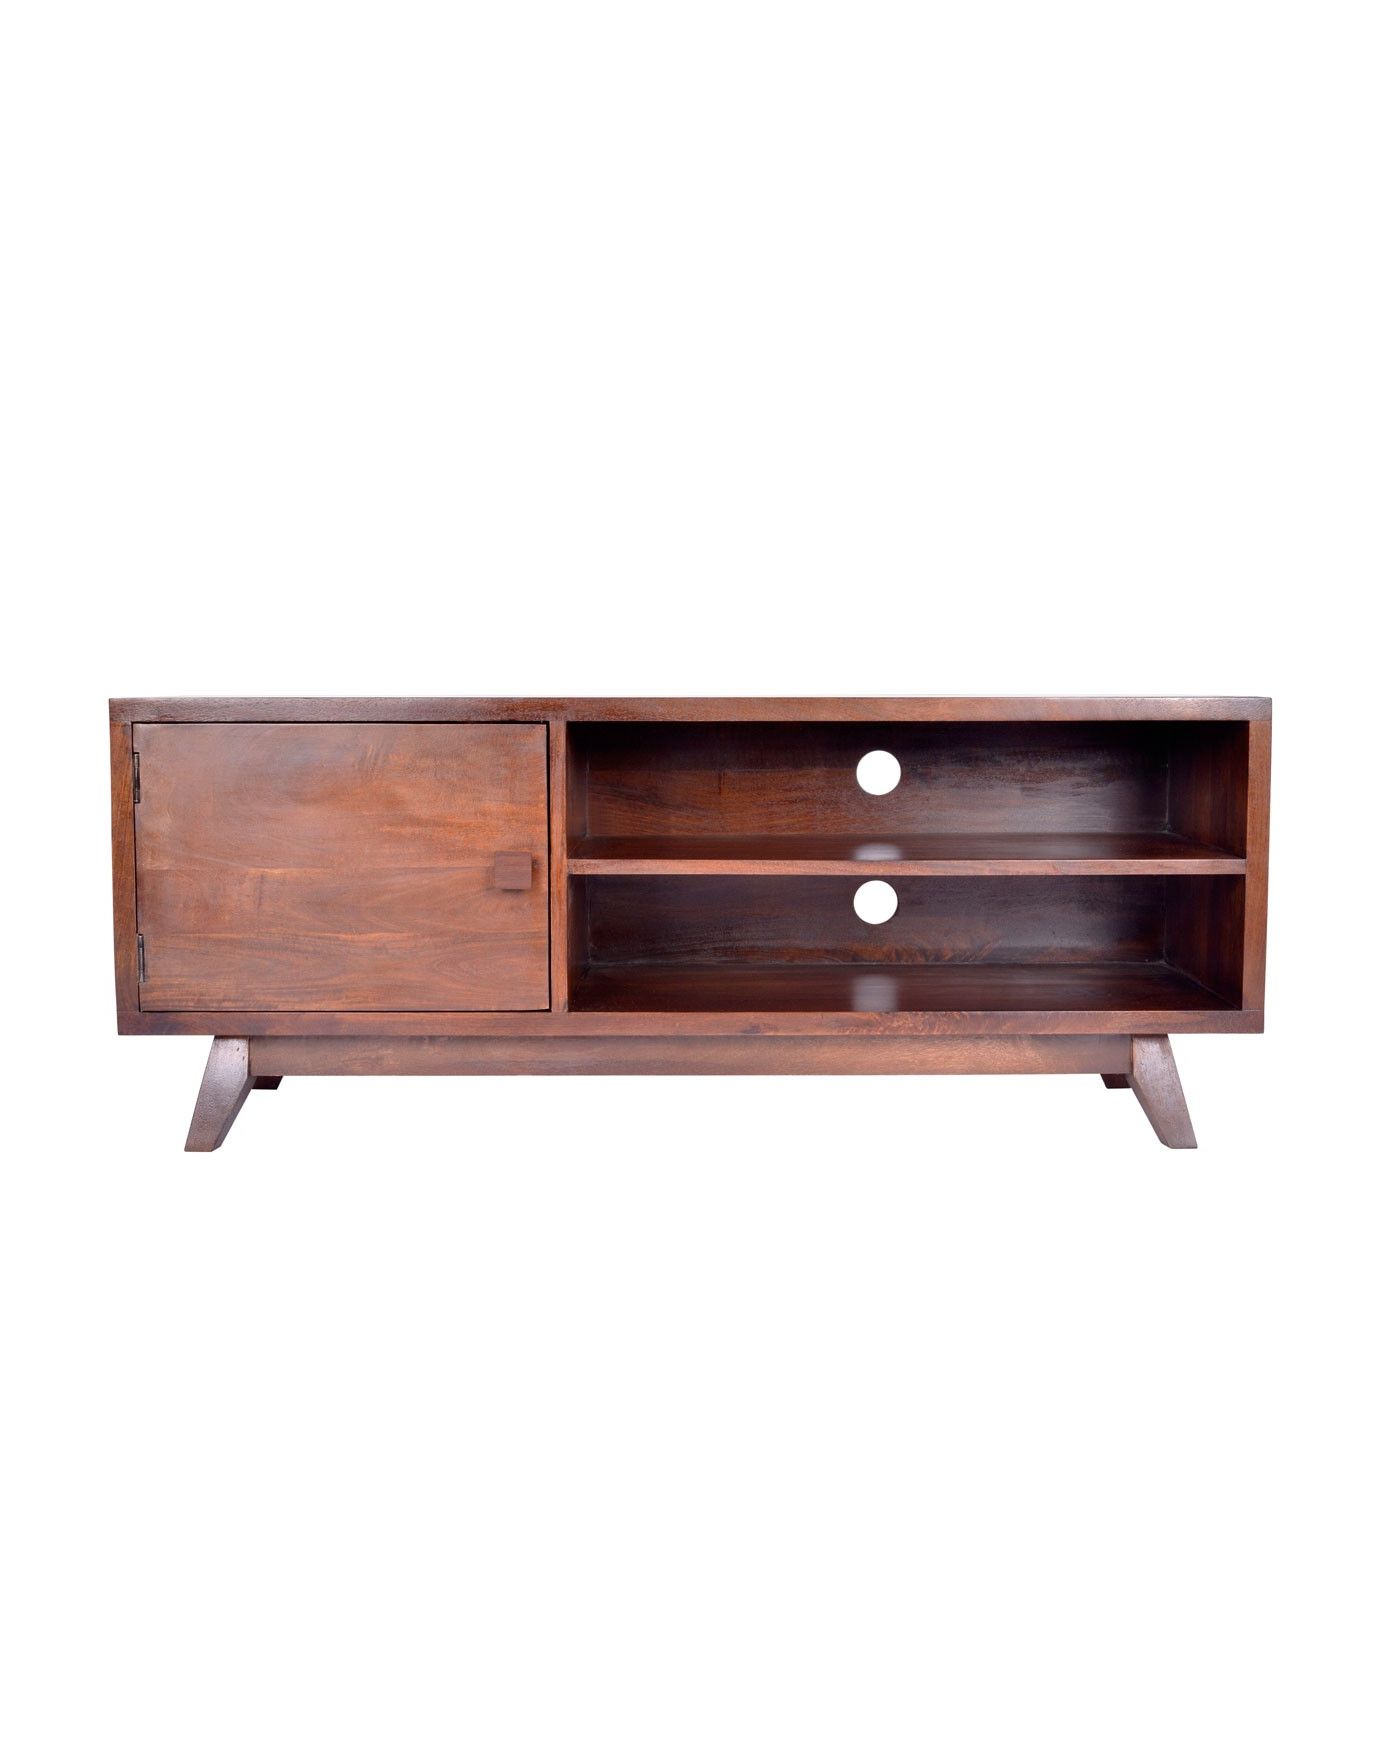 [%dark Wood Tv Stand With Shelf Retro Design 100% Solid Wood – Homescapes In Most Up To Date Hard Wood Tv Stands|hard Wood Tv Stands Throughout Preferred Dark Wood Tv Stand With Shelf Retro Design 100% Solid Wood – Homescapes|most Recent Hard Wood Tv Stands Intended For Dark Wood Tv Stand With Shelf Retro Design 100% Solid Wood – Homescapes|well Known Dark Wood Tv Stand With Shelf Retro Design 100% Solid Wood – Homescapes Within Hard Wood Tv Stands%] (View 13 of 20)